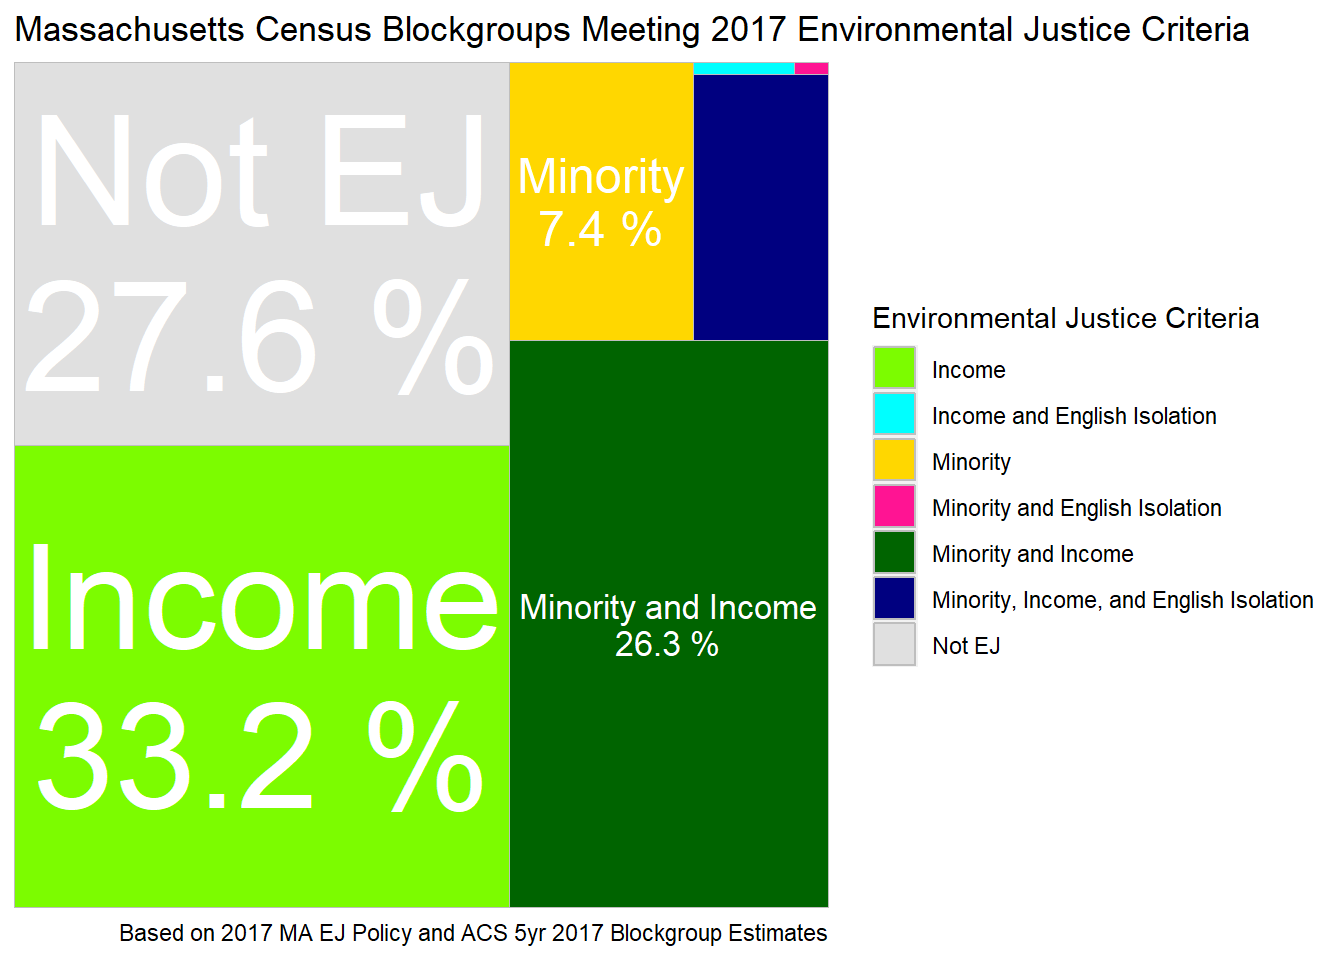 Tree map of block groups classified as environmental justice by 2017 policy.